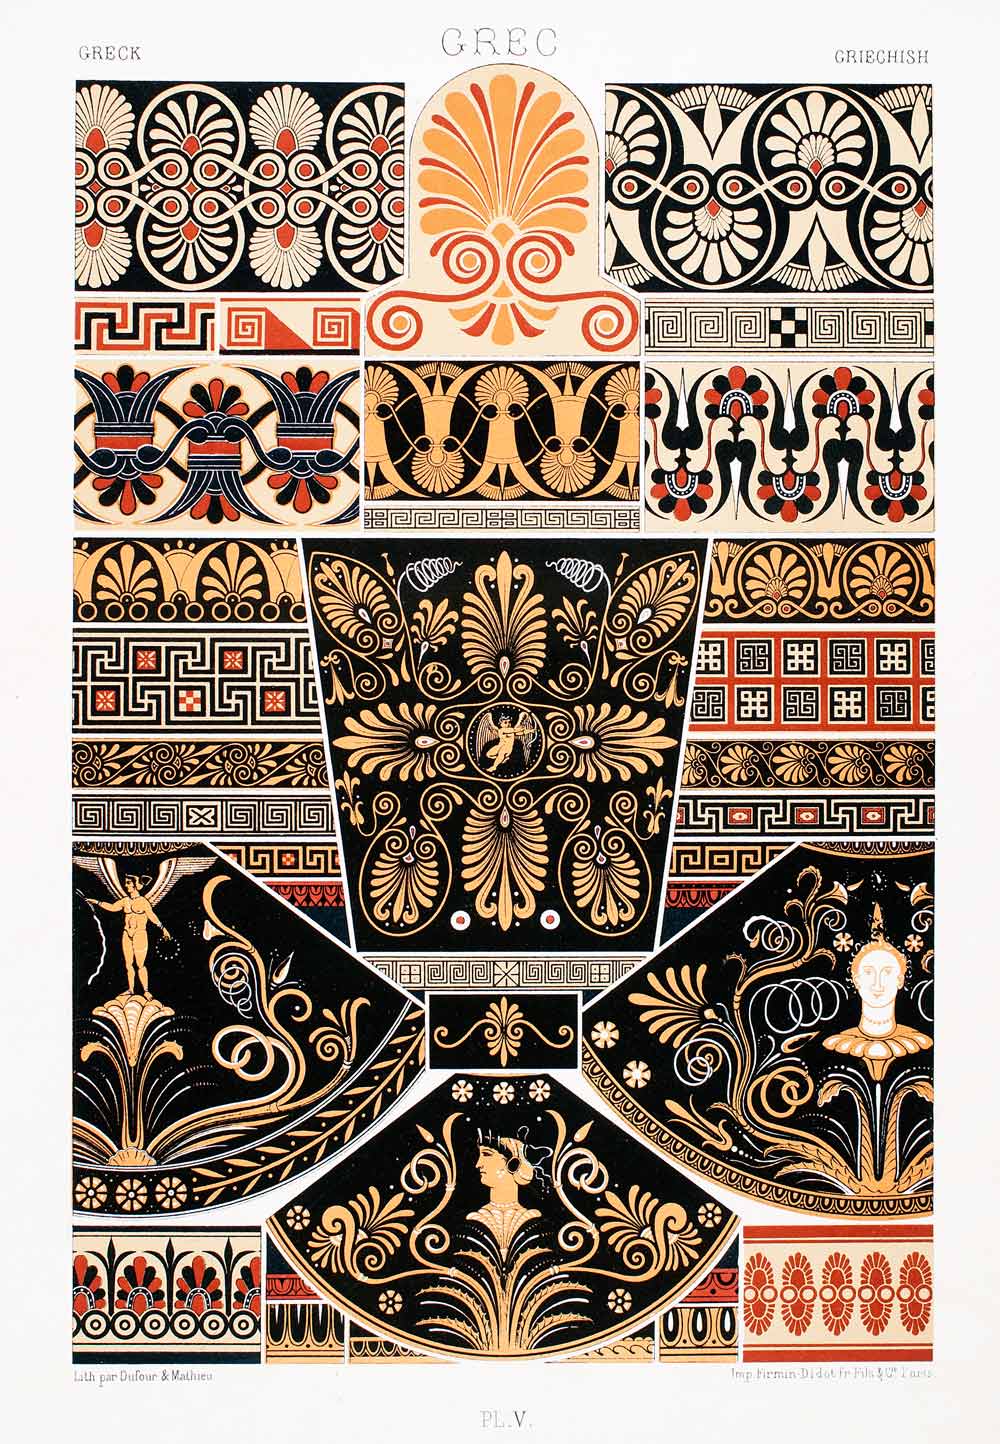 1875 Chromolithograph Greek Vase Pattern Design Red Figure Floral Repeated LOR1